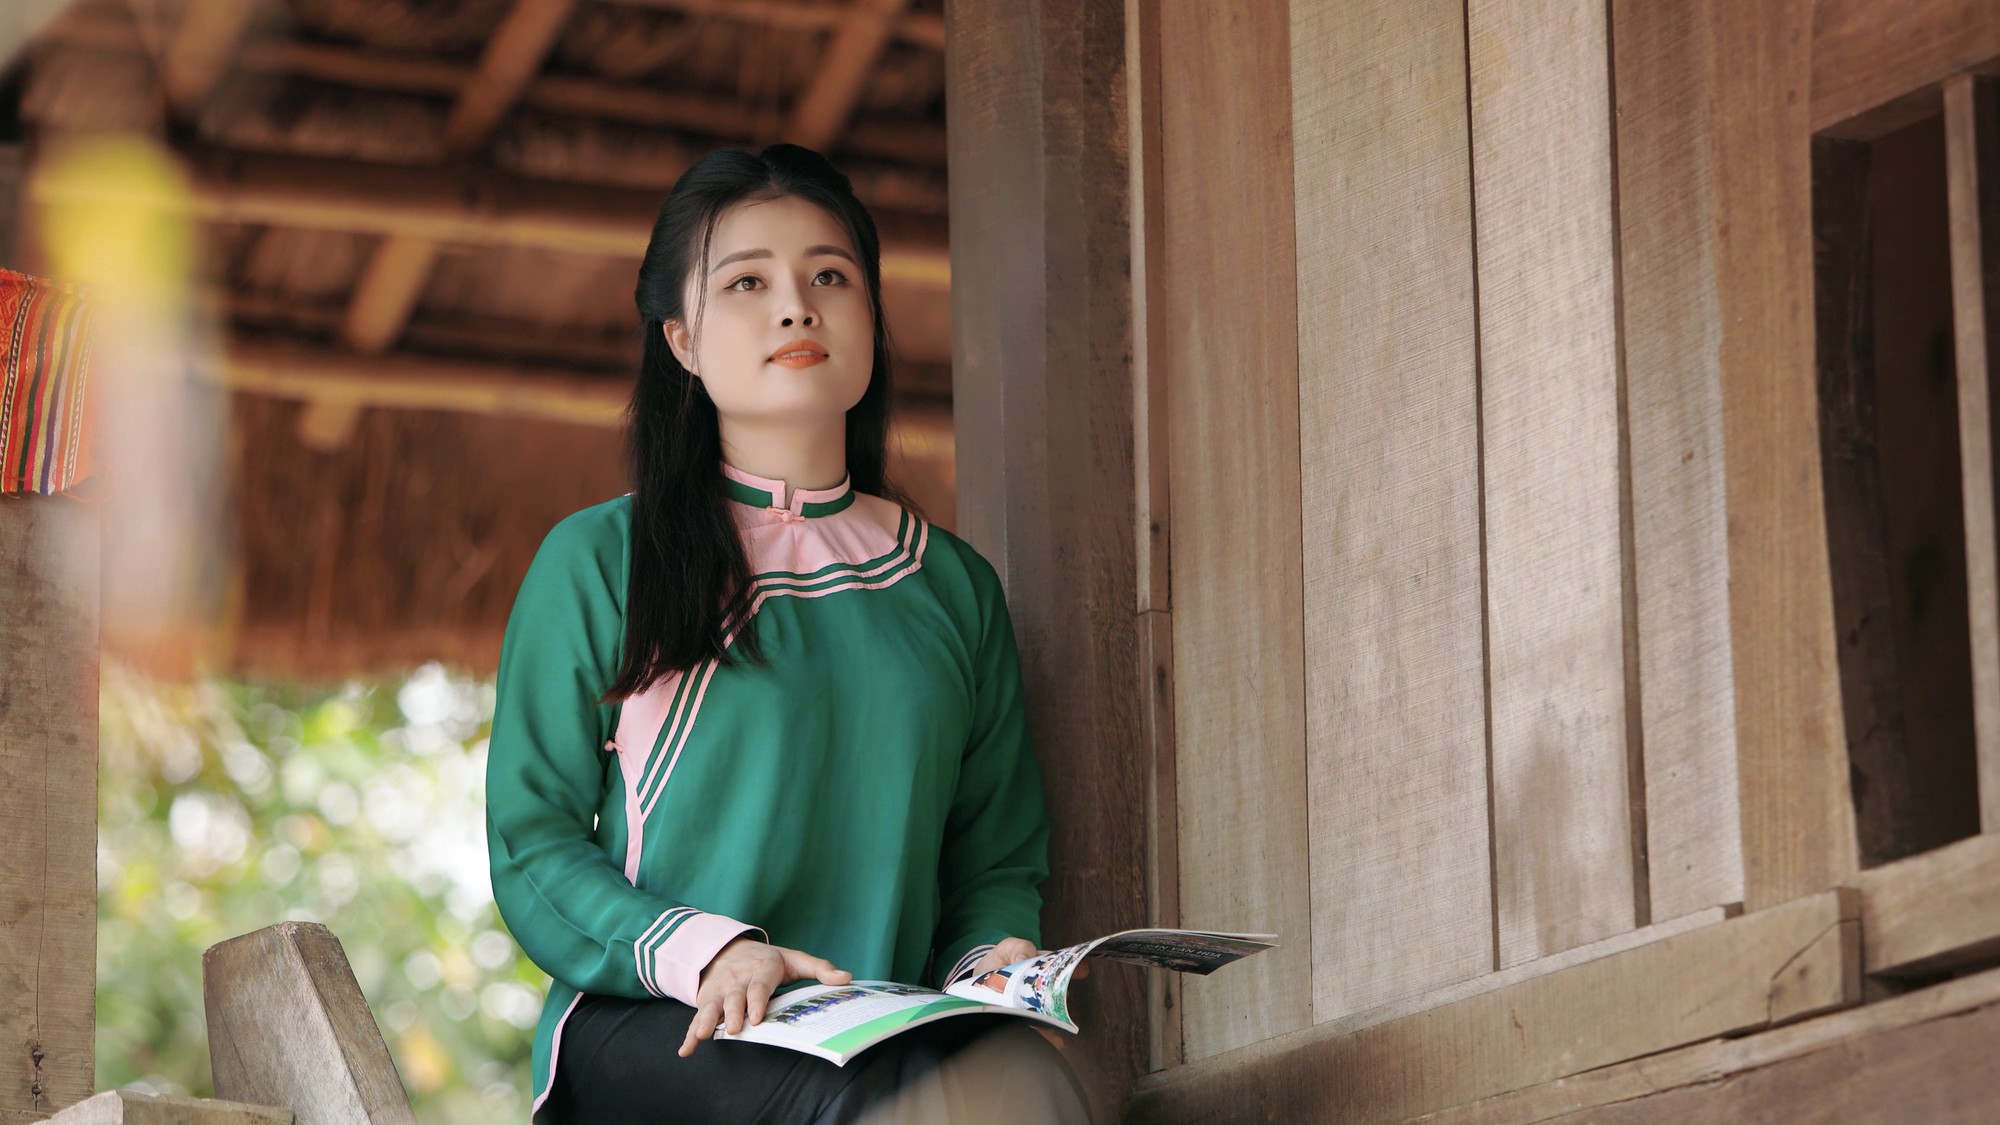 The sweet beauty of Pham Thuy Linh in MV 